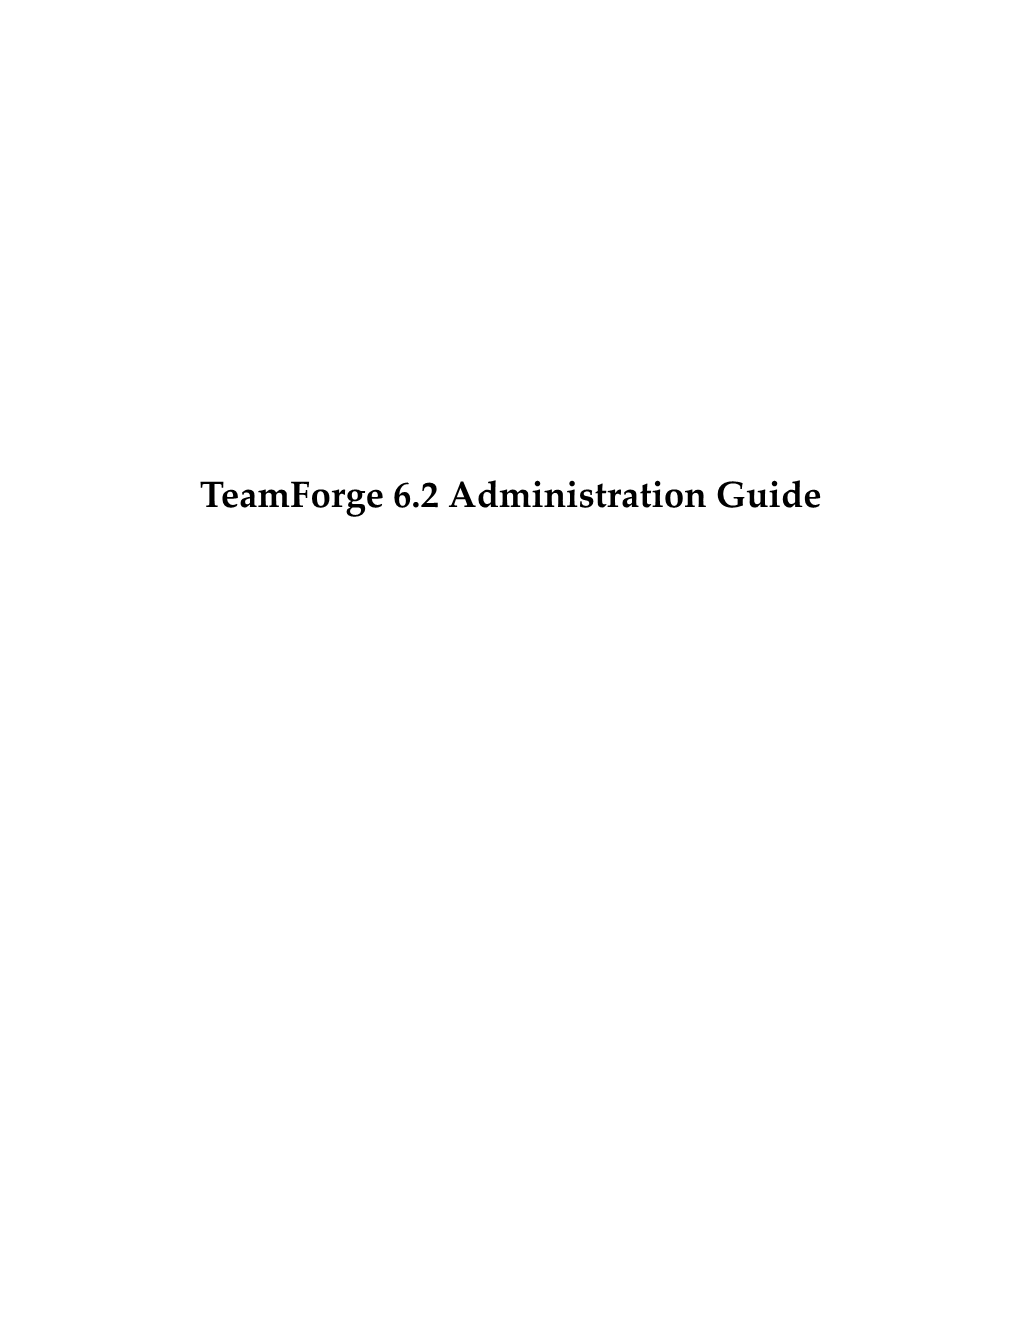 Teamforge 6.2 Administration Guide 2 | Teamforge 6.2 | TOC